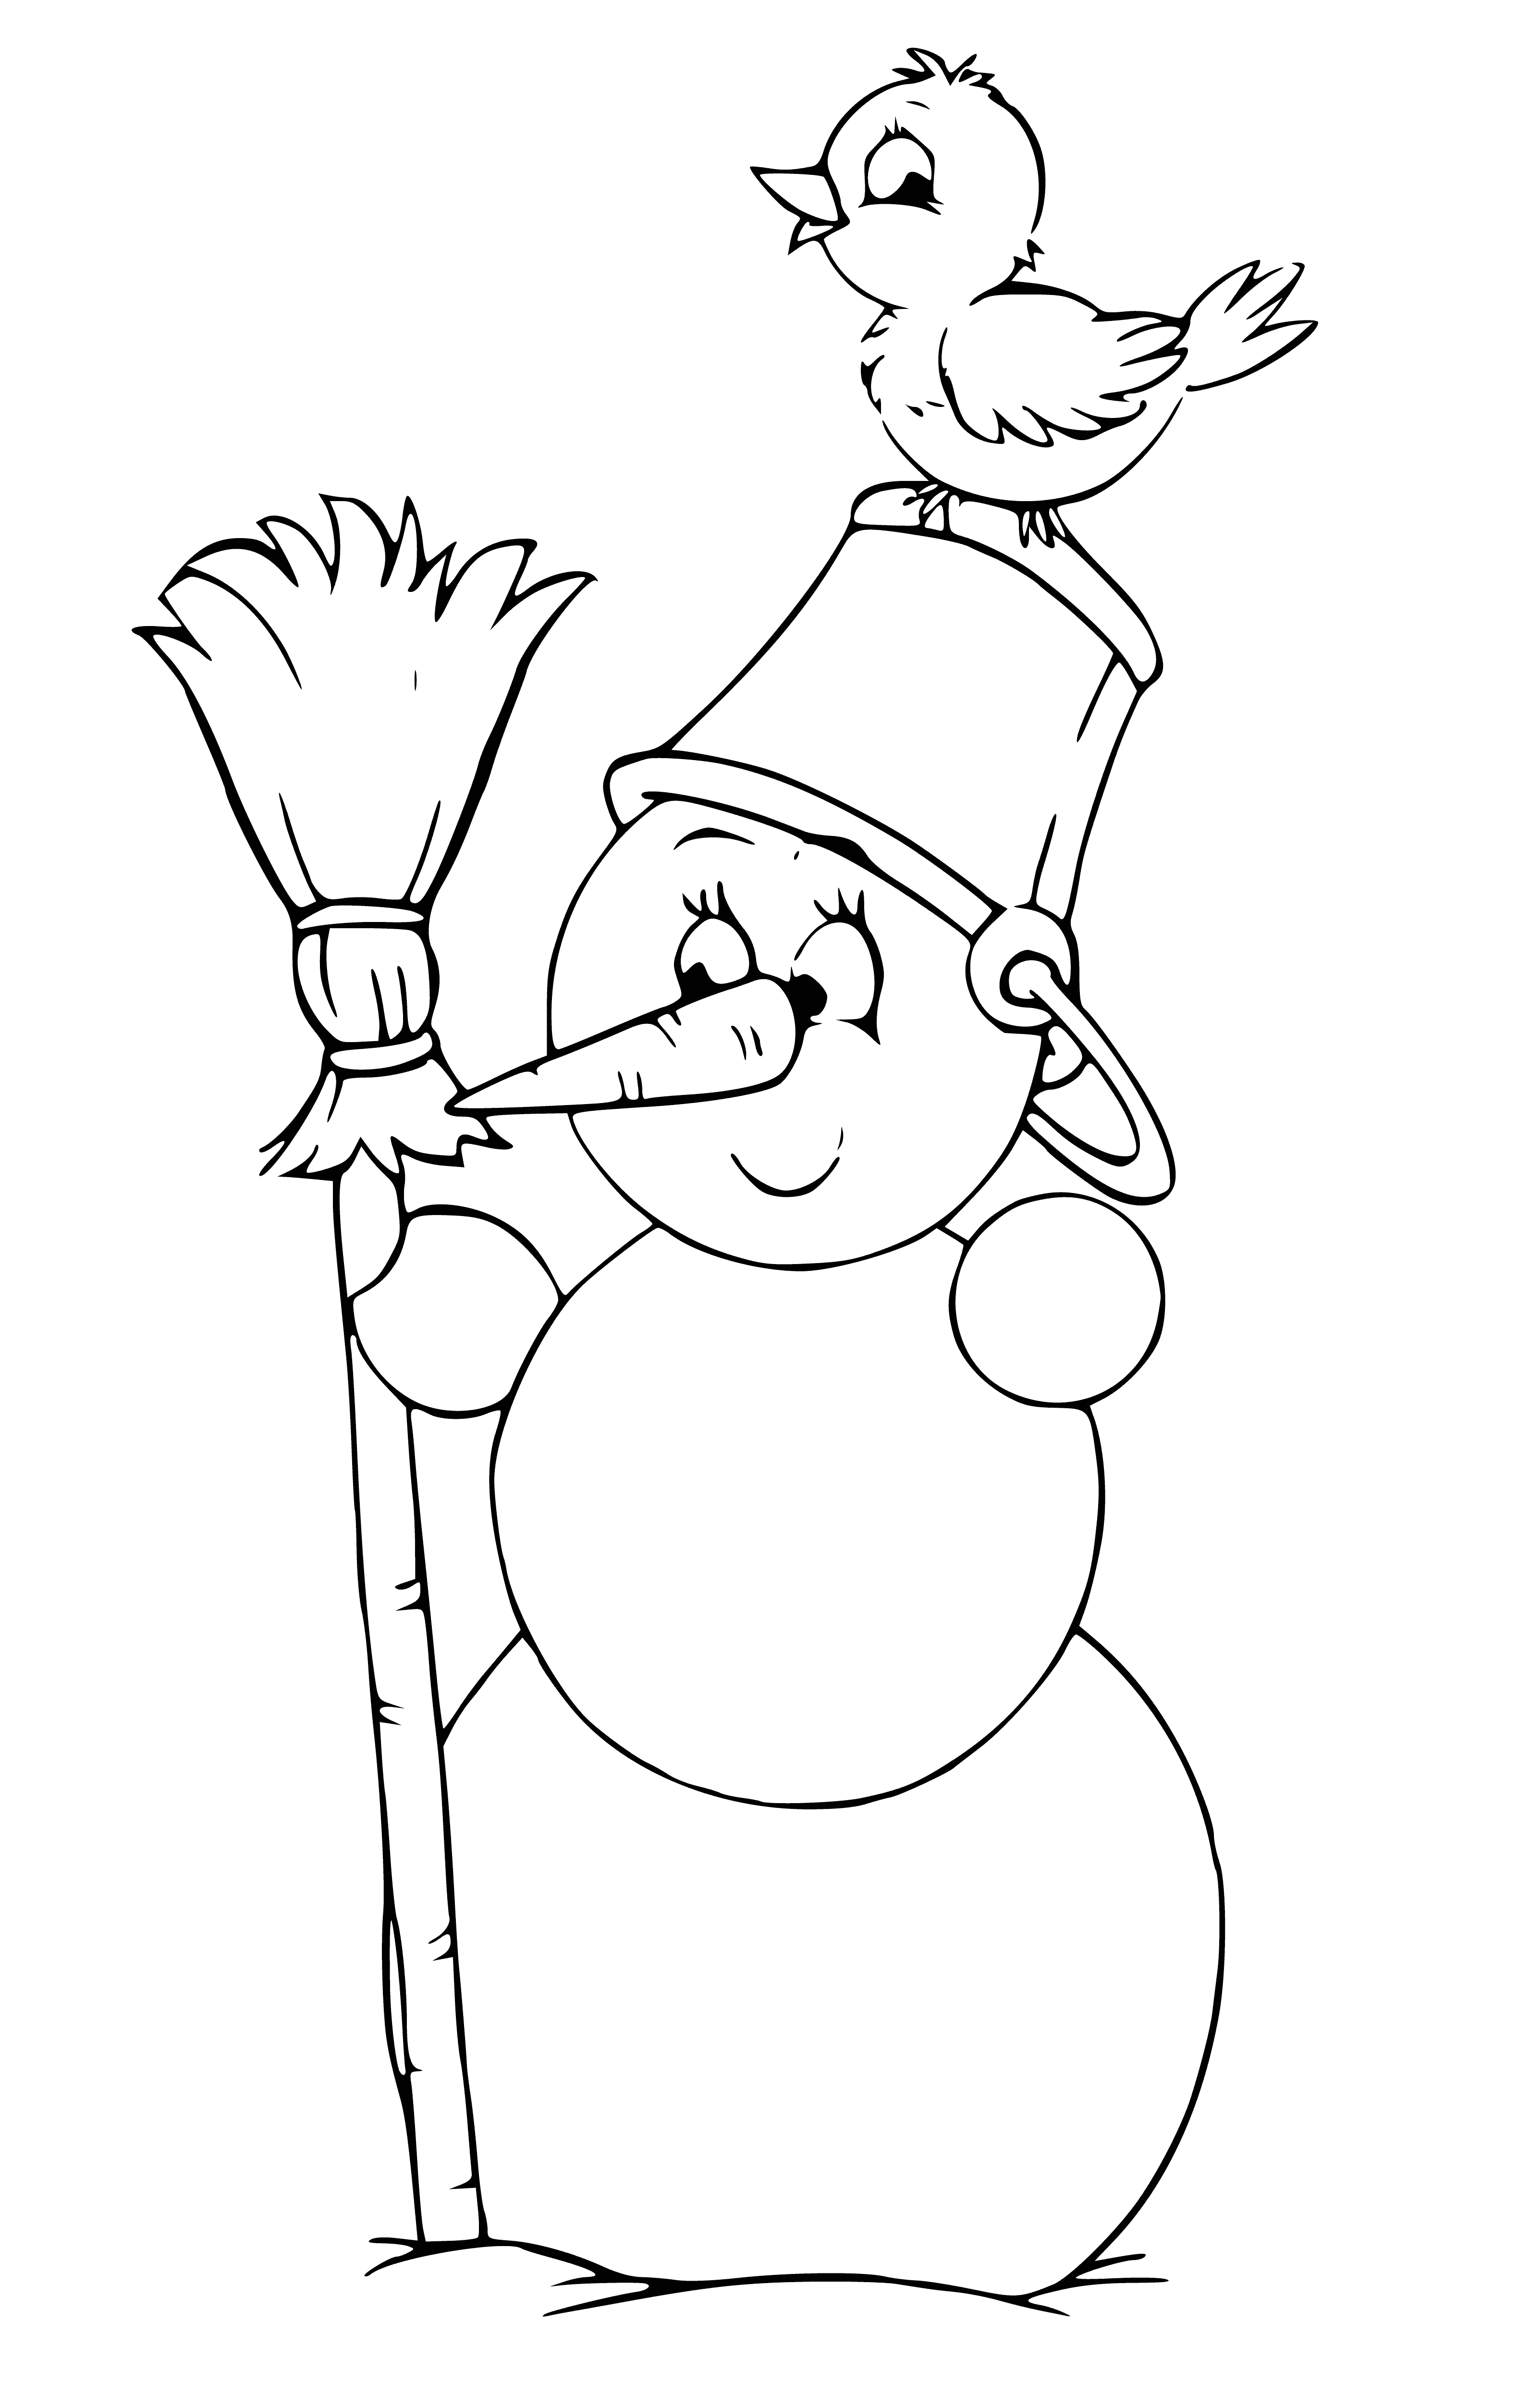 coloring page: A snowman wearing a hat and scarf stands outside a house with a broom in hand. #winter